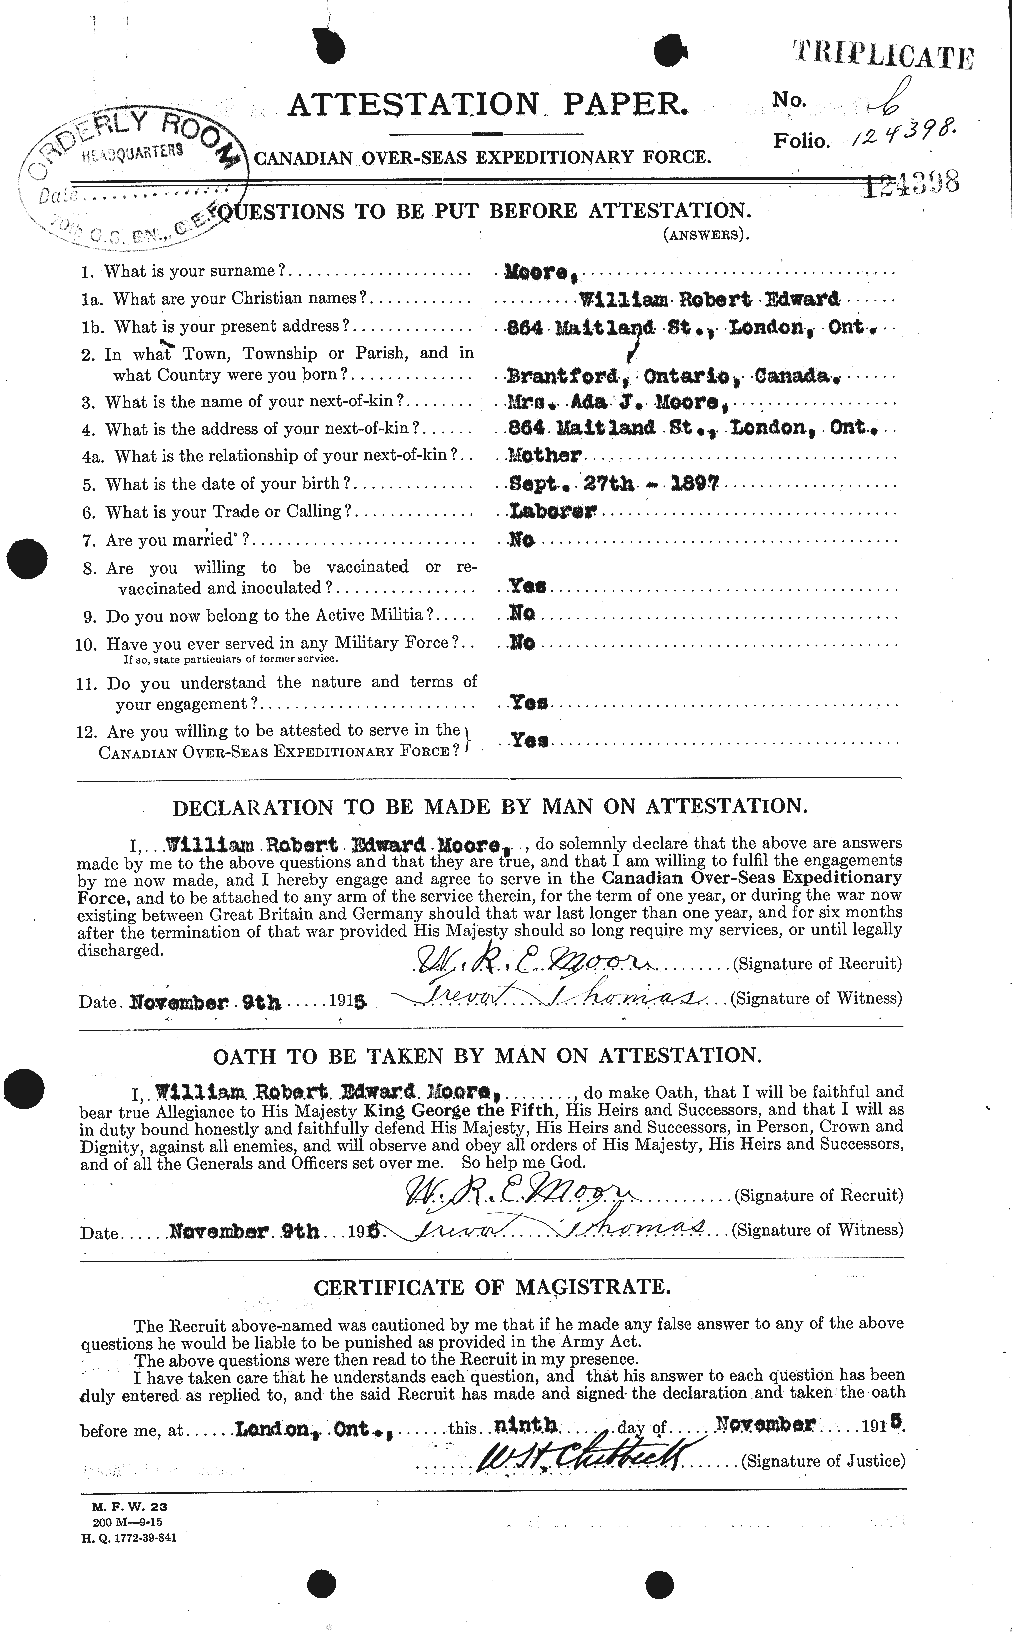 Personnel Records of the First World War - CEF 505866a